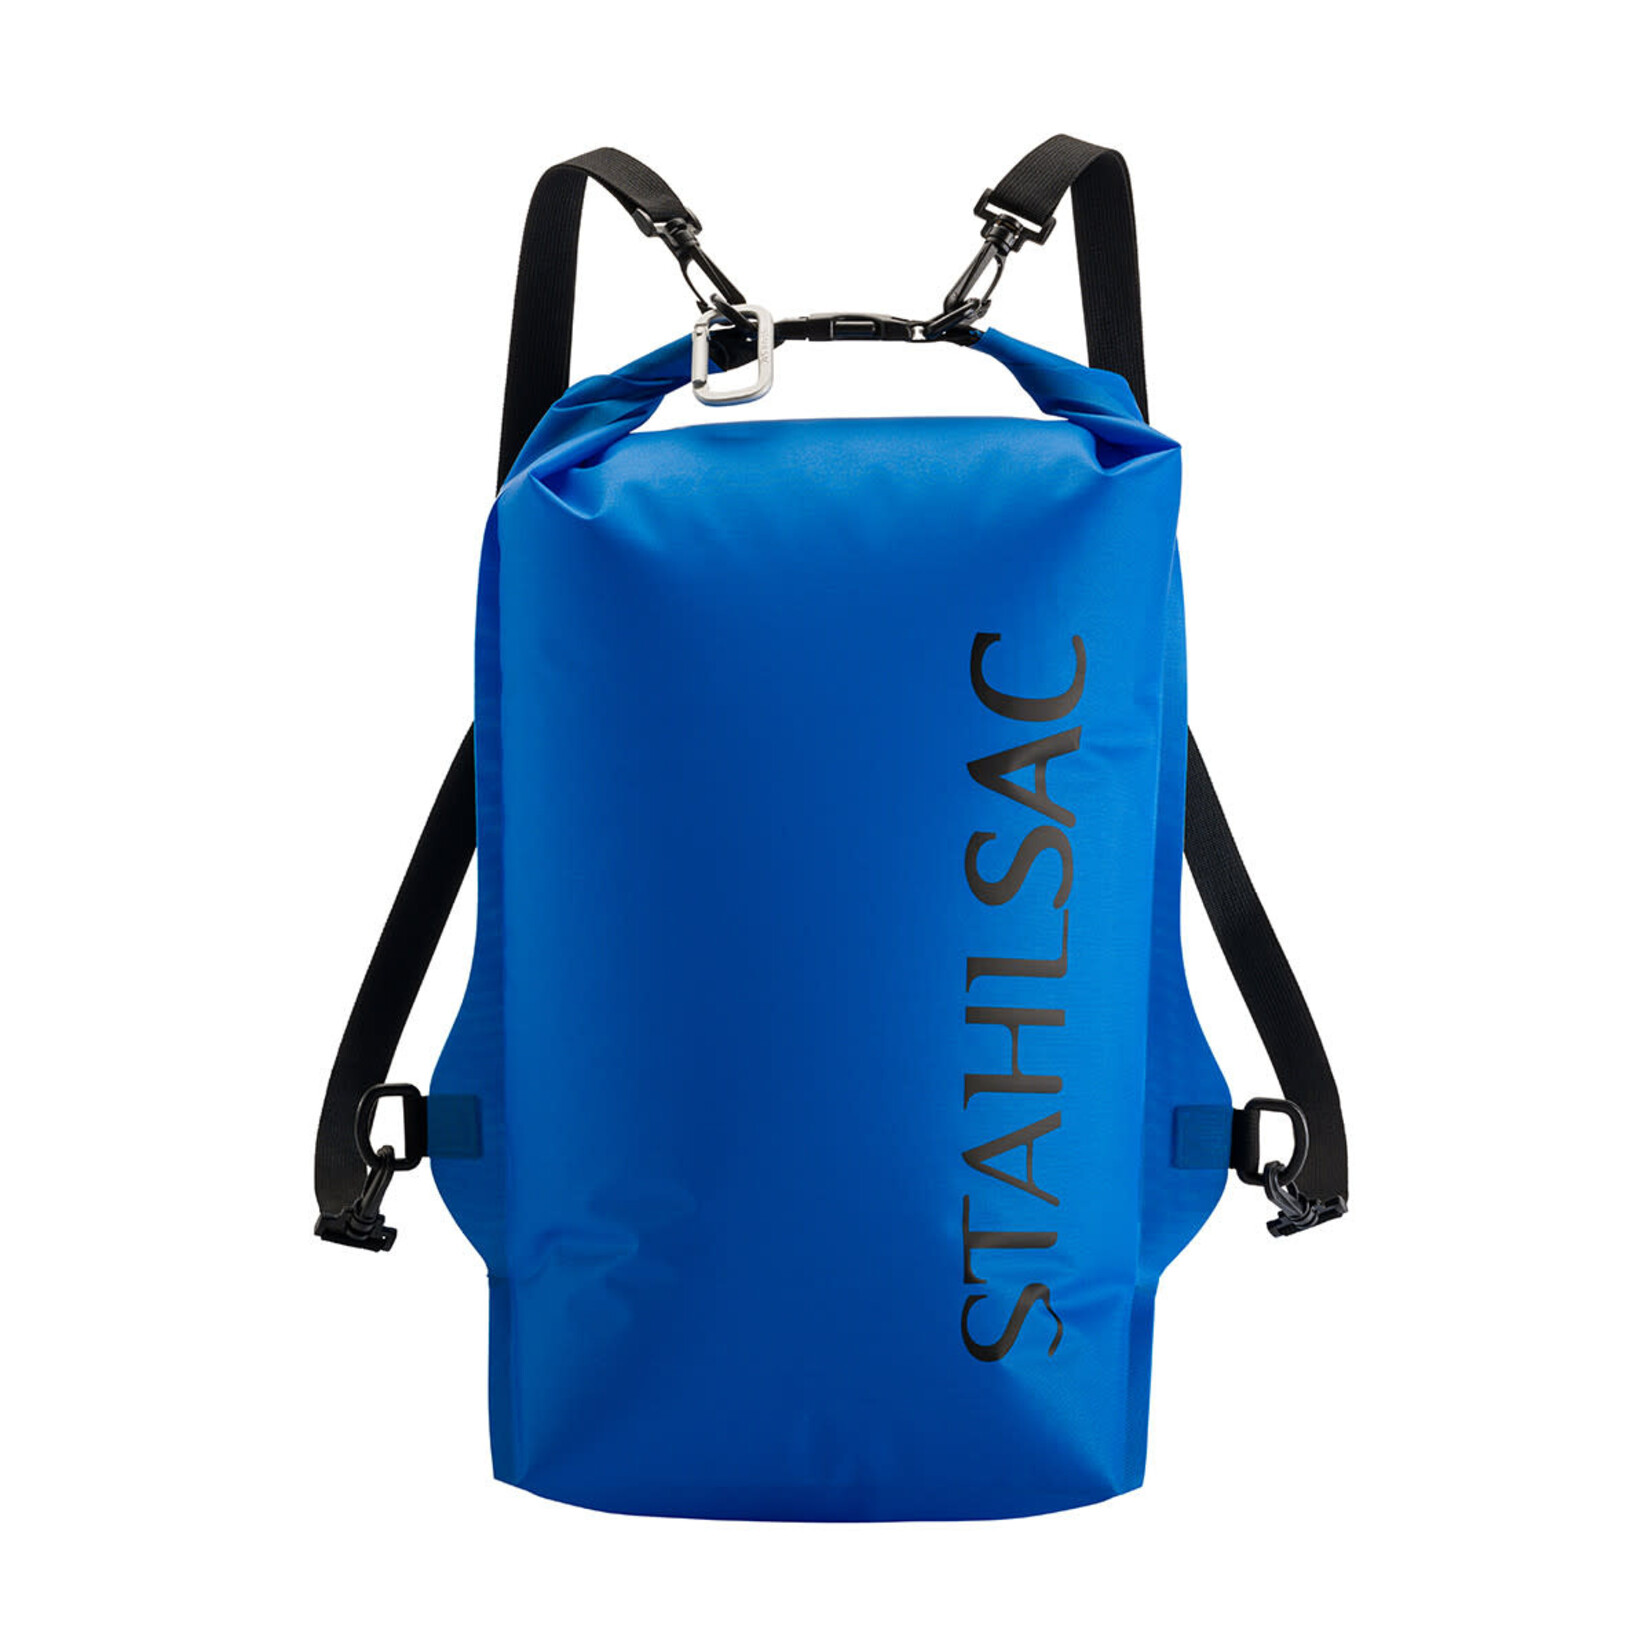 Stahlsac Stahlsac Abyss Drylite Dry Bag